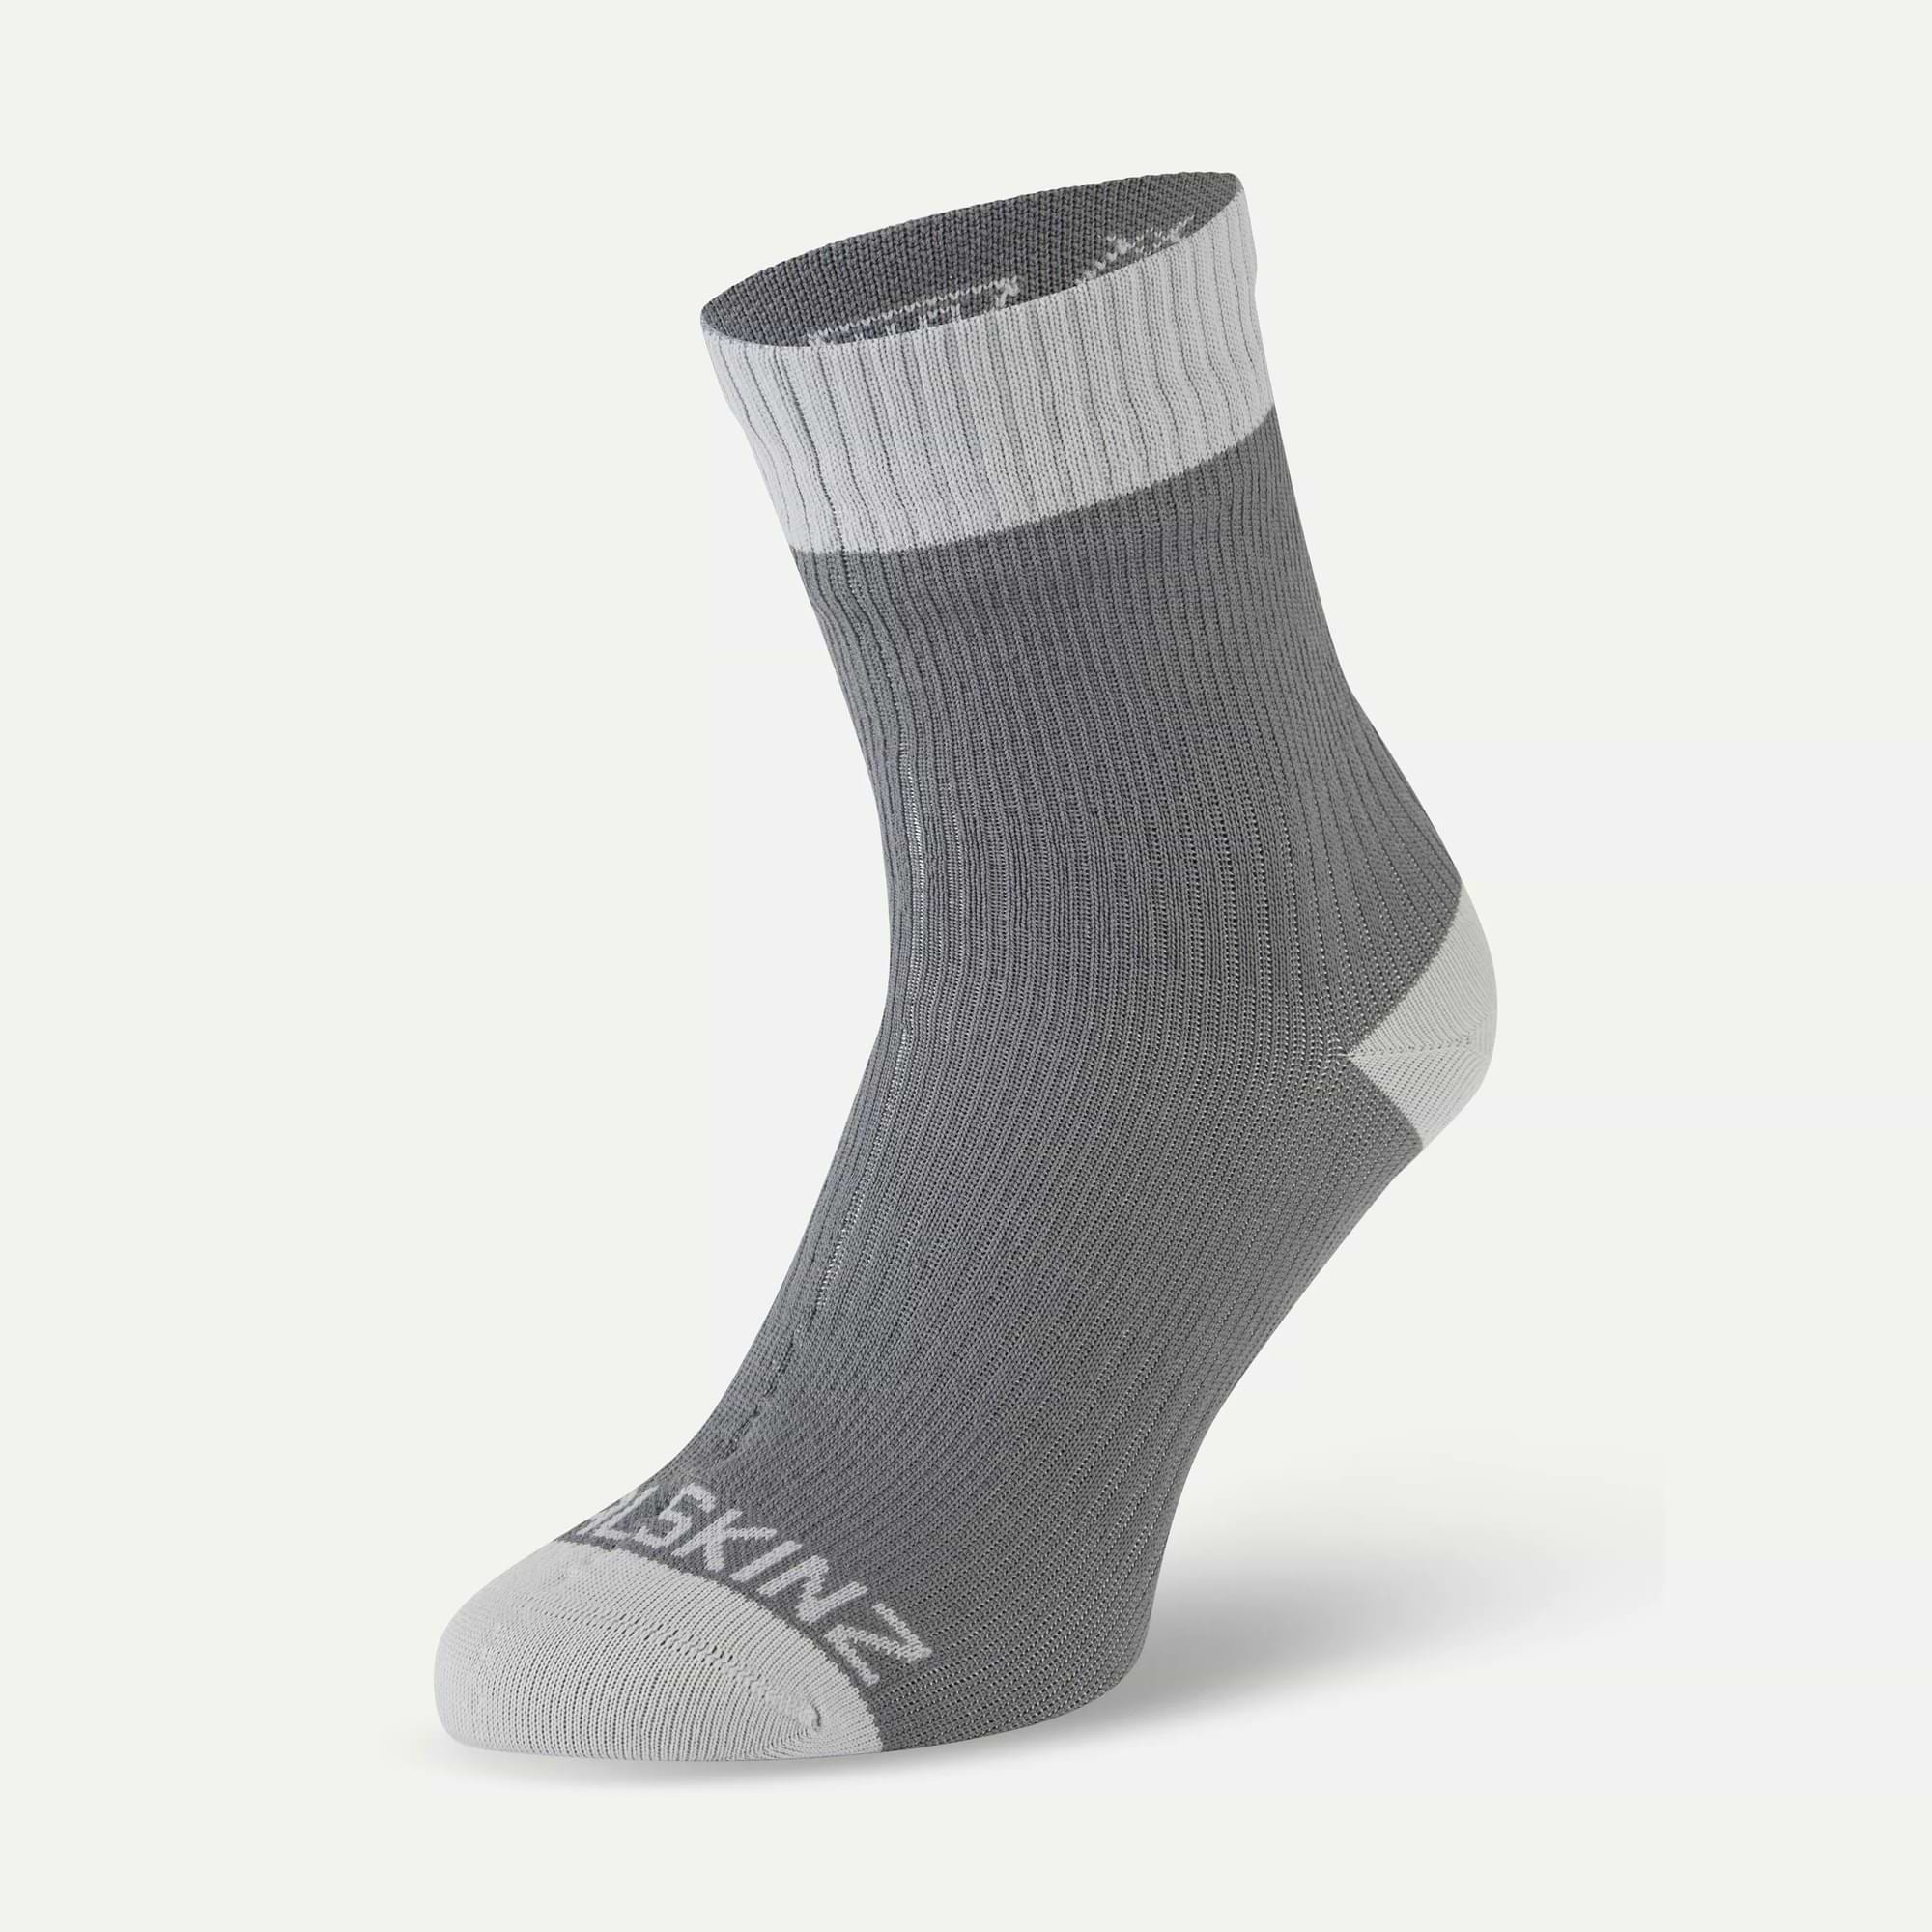 grippy socks color meaning｜TikTok Search